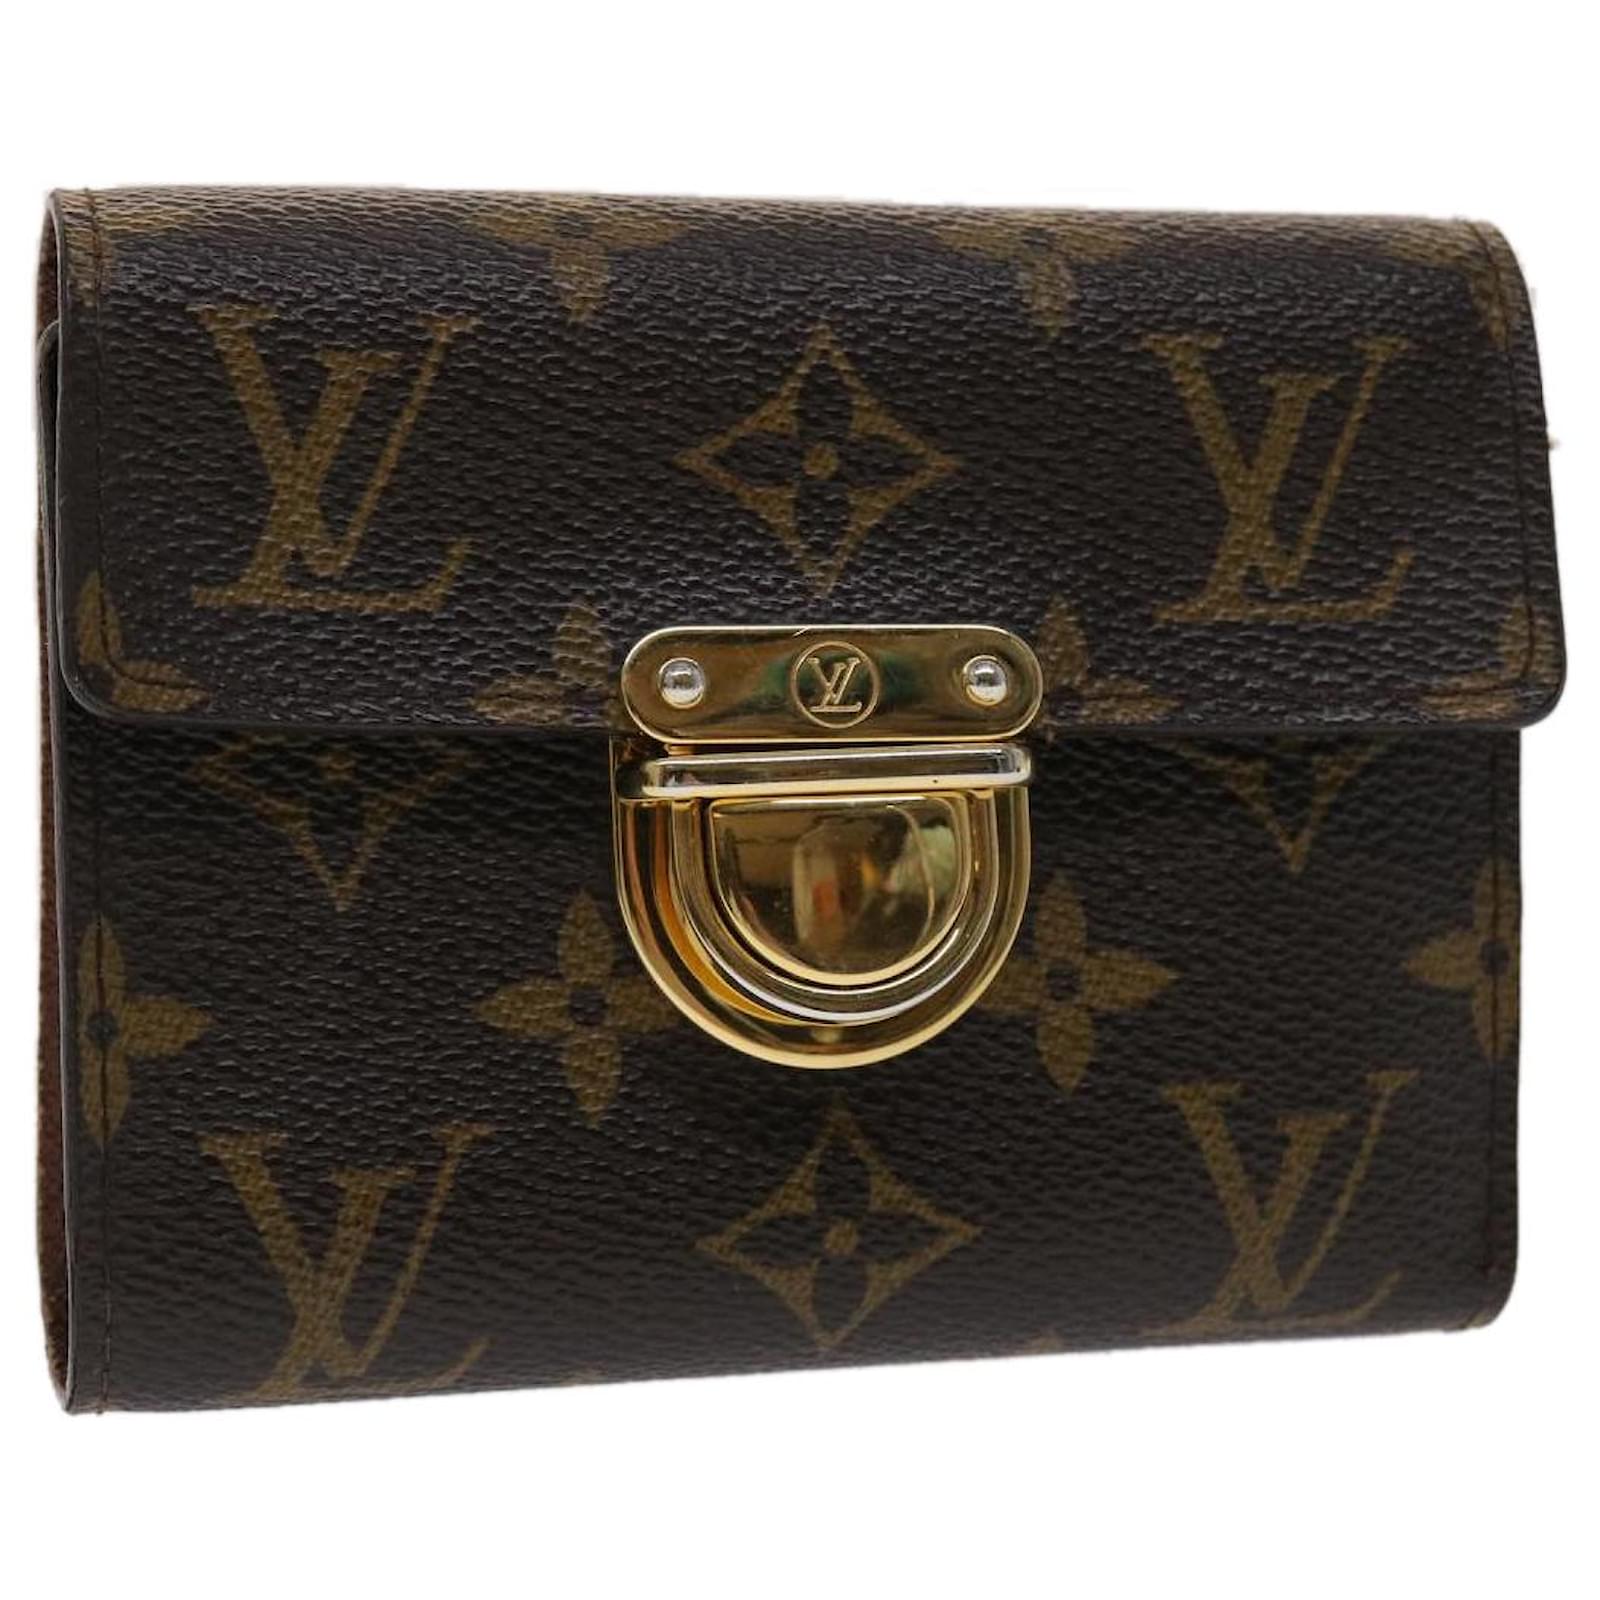 AUTH LOUIS VUITTON VERNIS BI-FOLD LEATHER COMPACT COIN WALLET PREOWNED